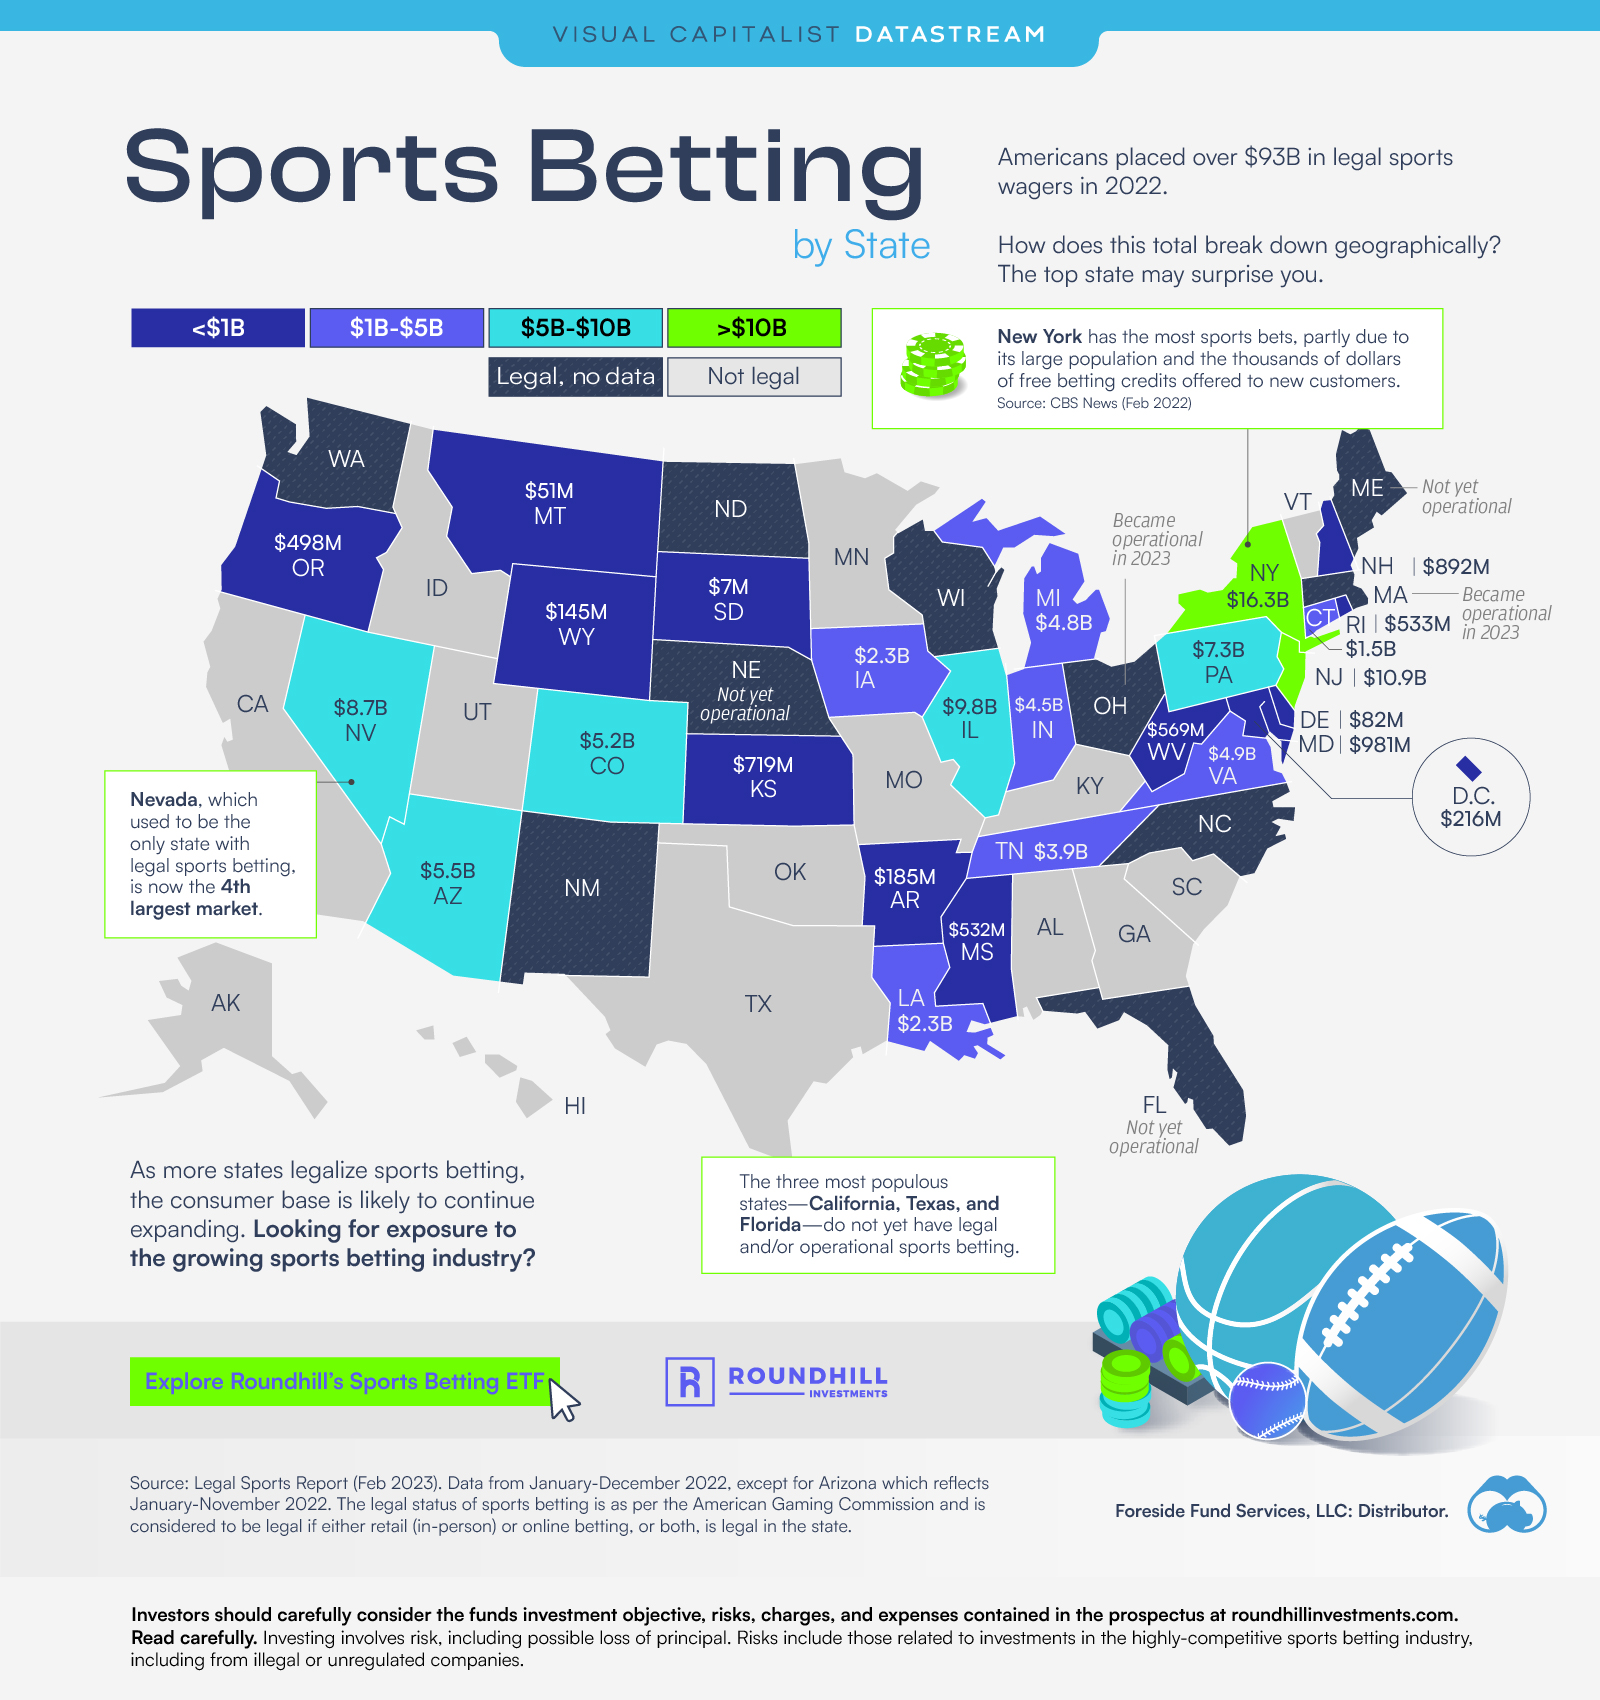 Mapped Legal Sports Betting Totals by State